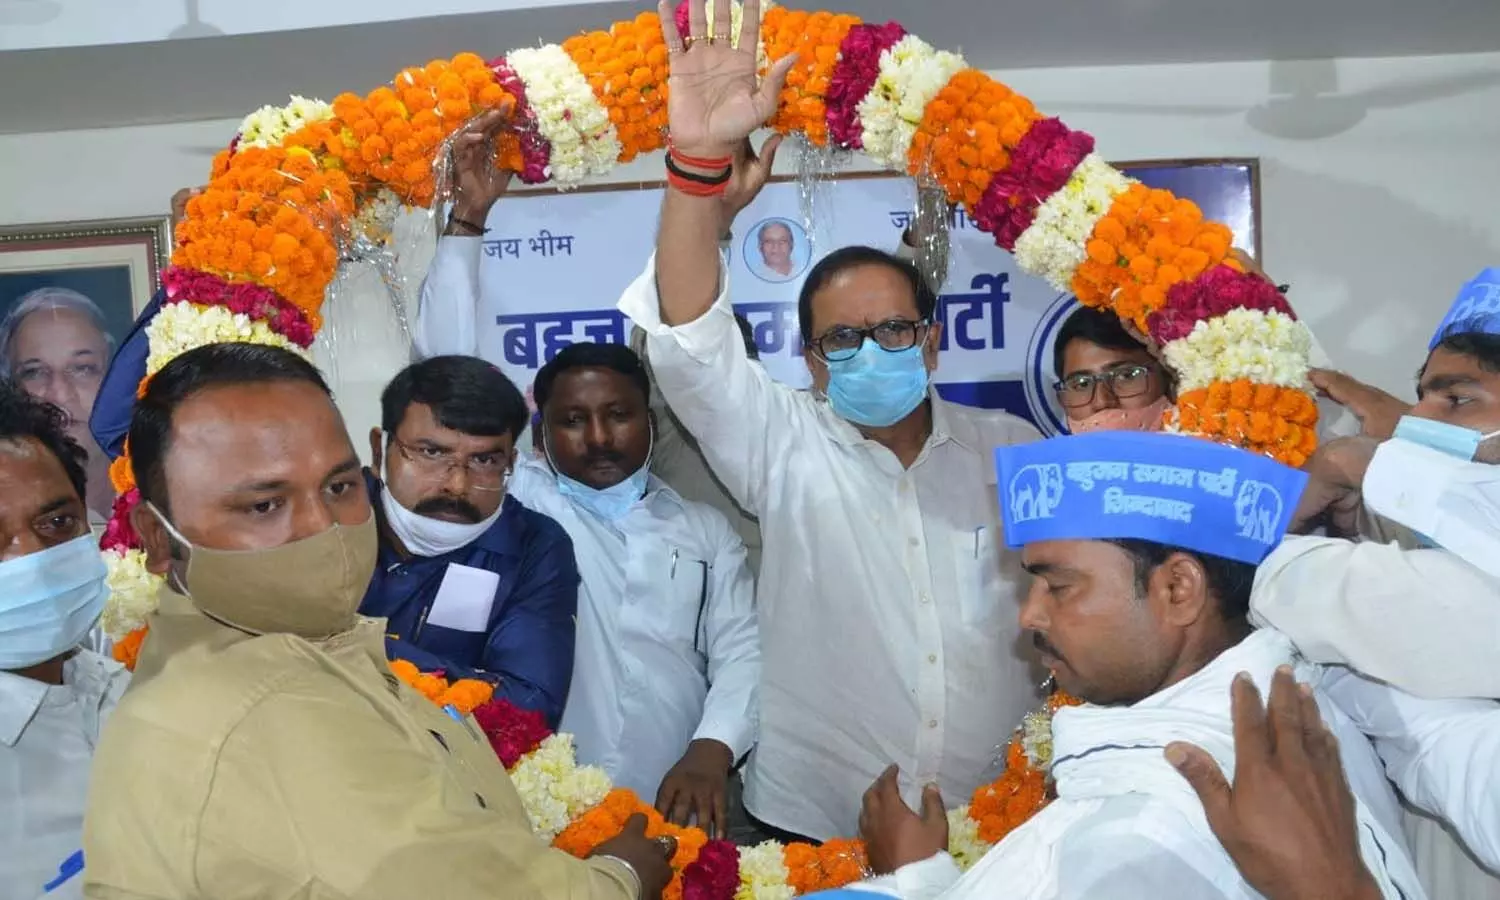 Merger of Bharat Party Democratic with BSP